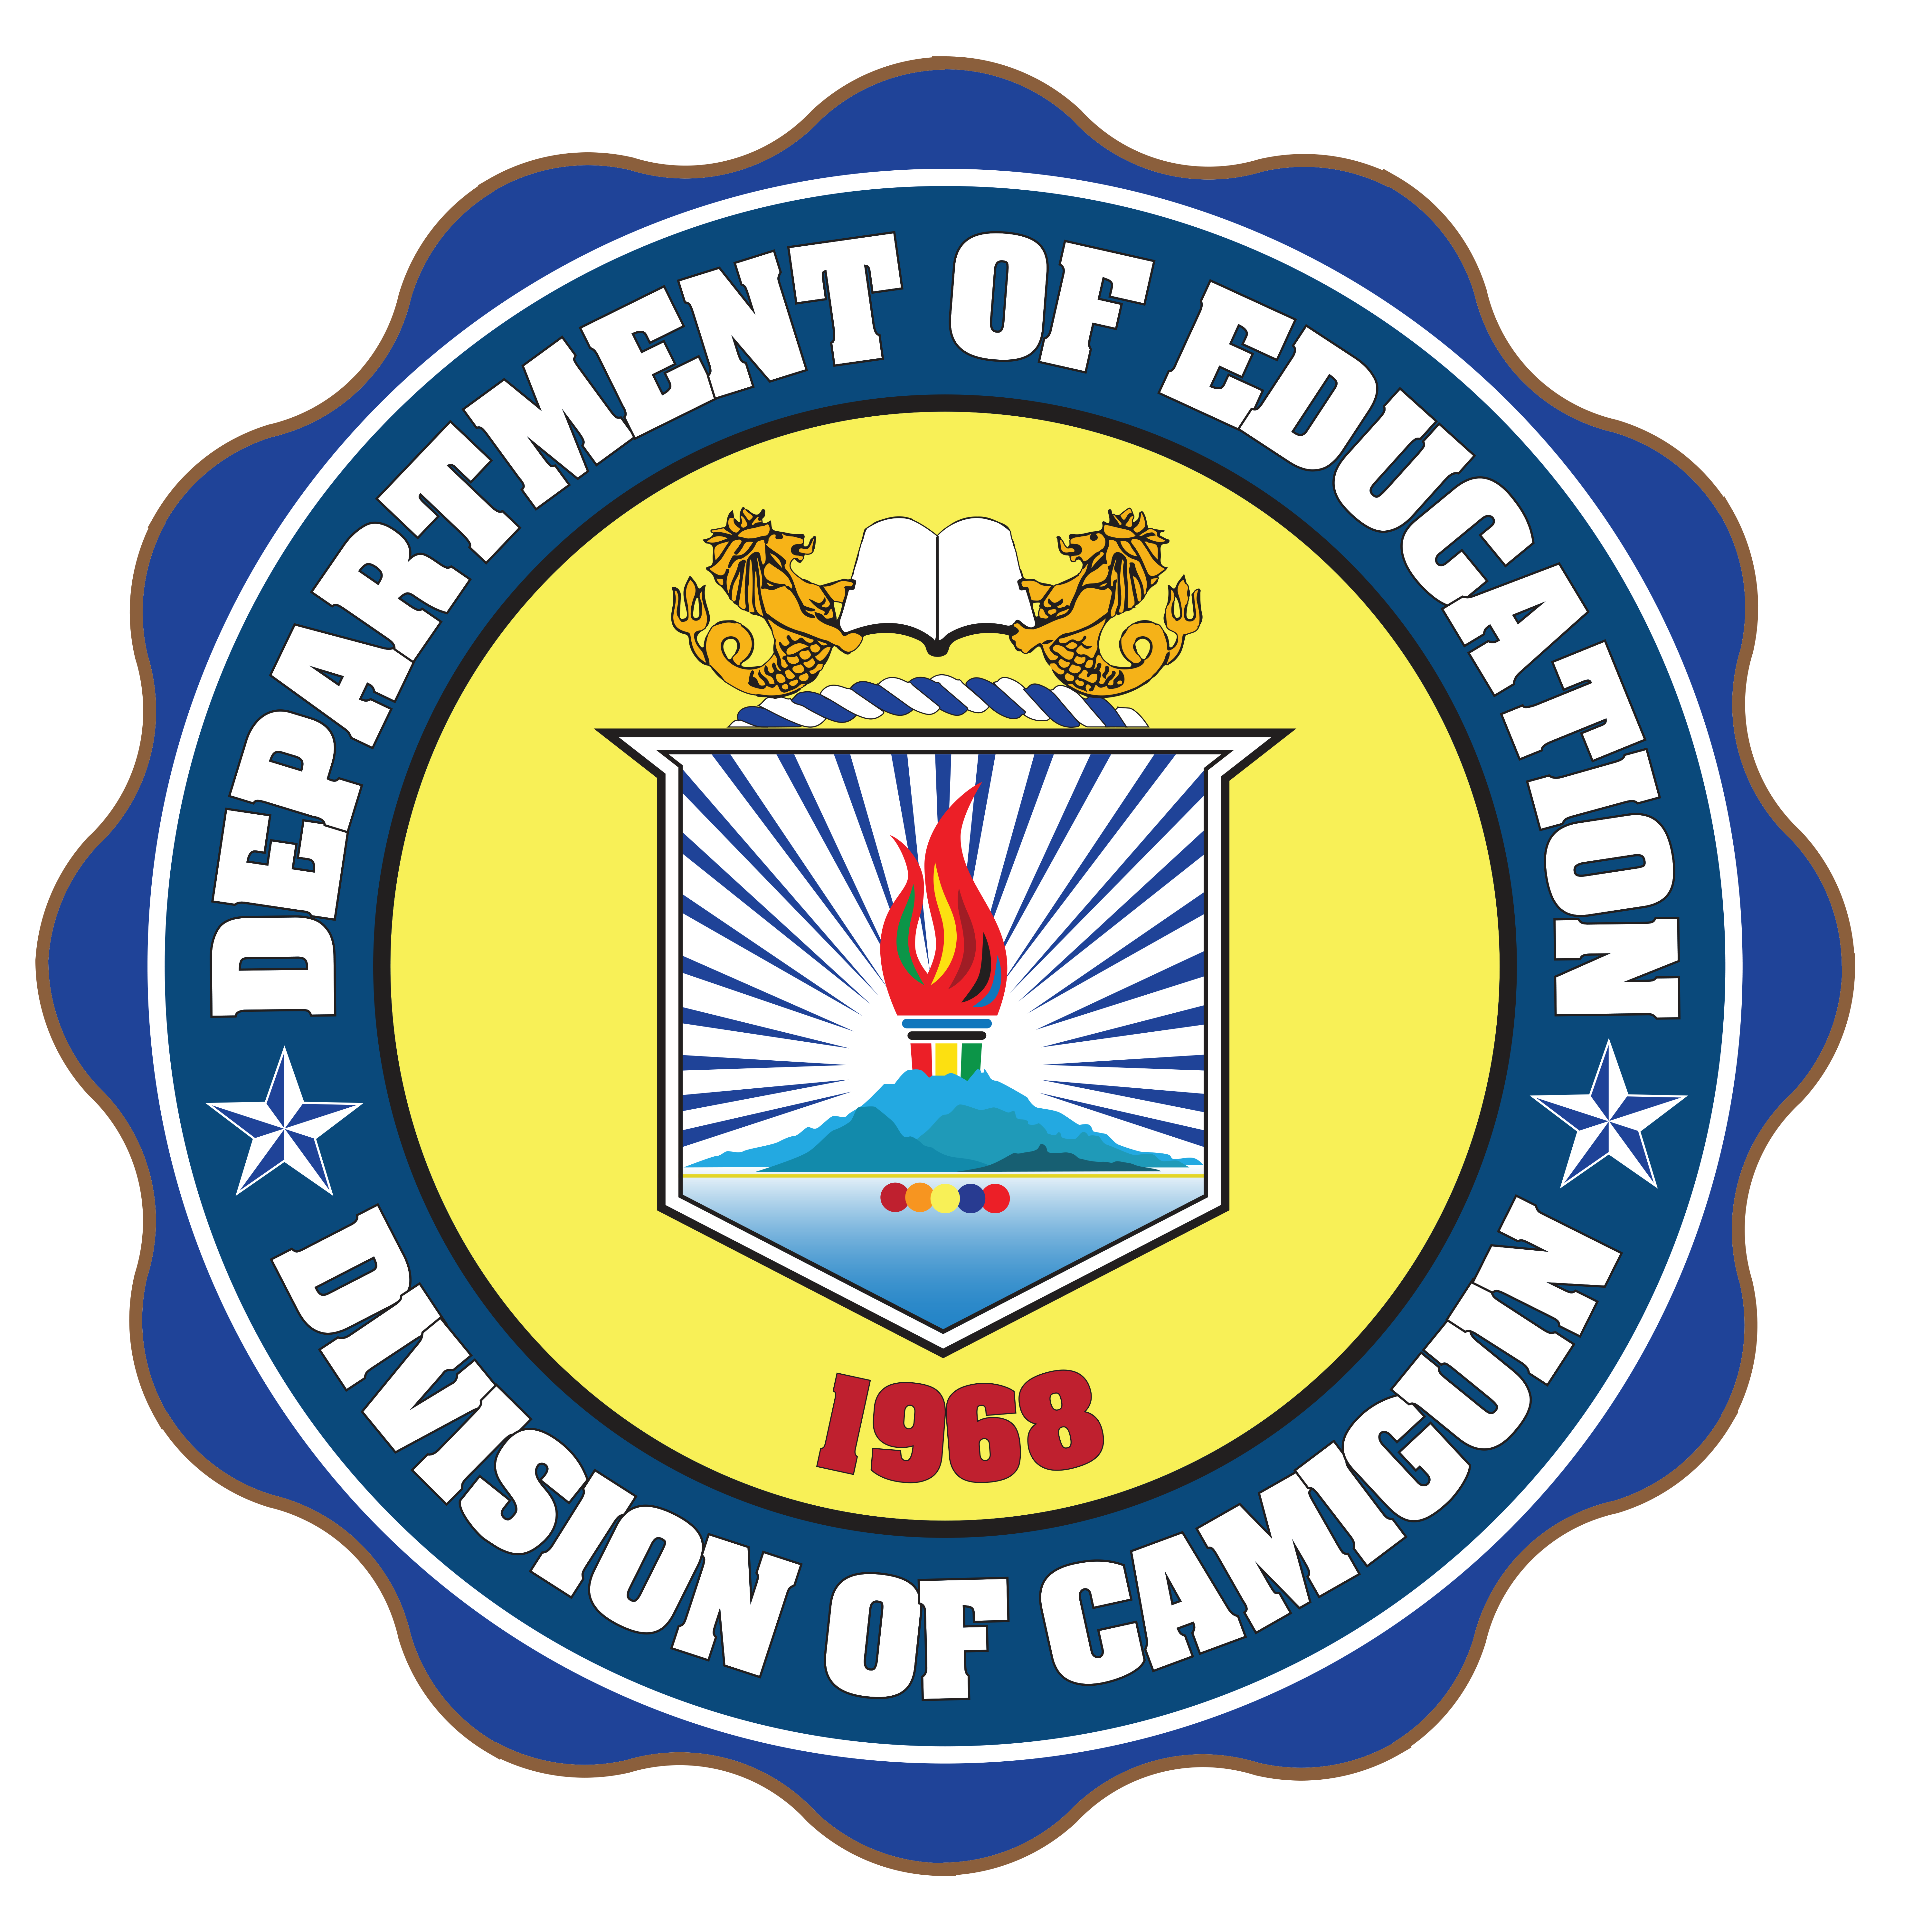 DEPARTMENT OF EDUCATION - DIVISION OF CAMIGUIN Official Logo